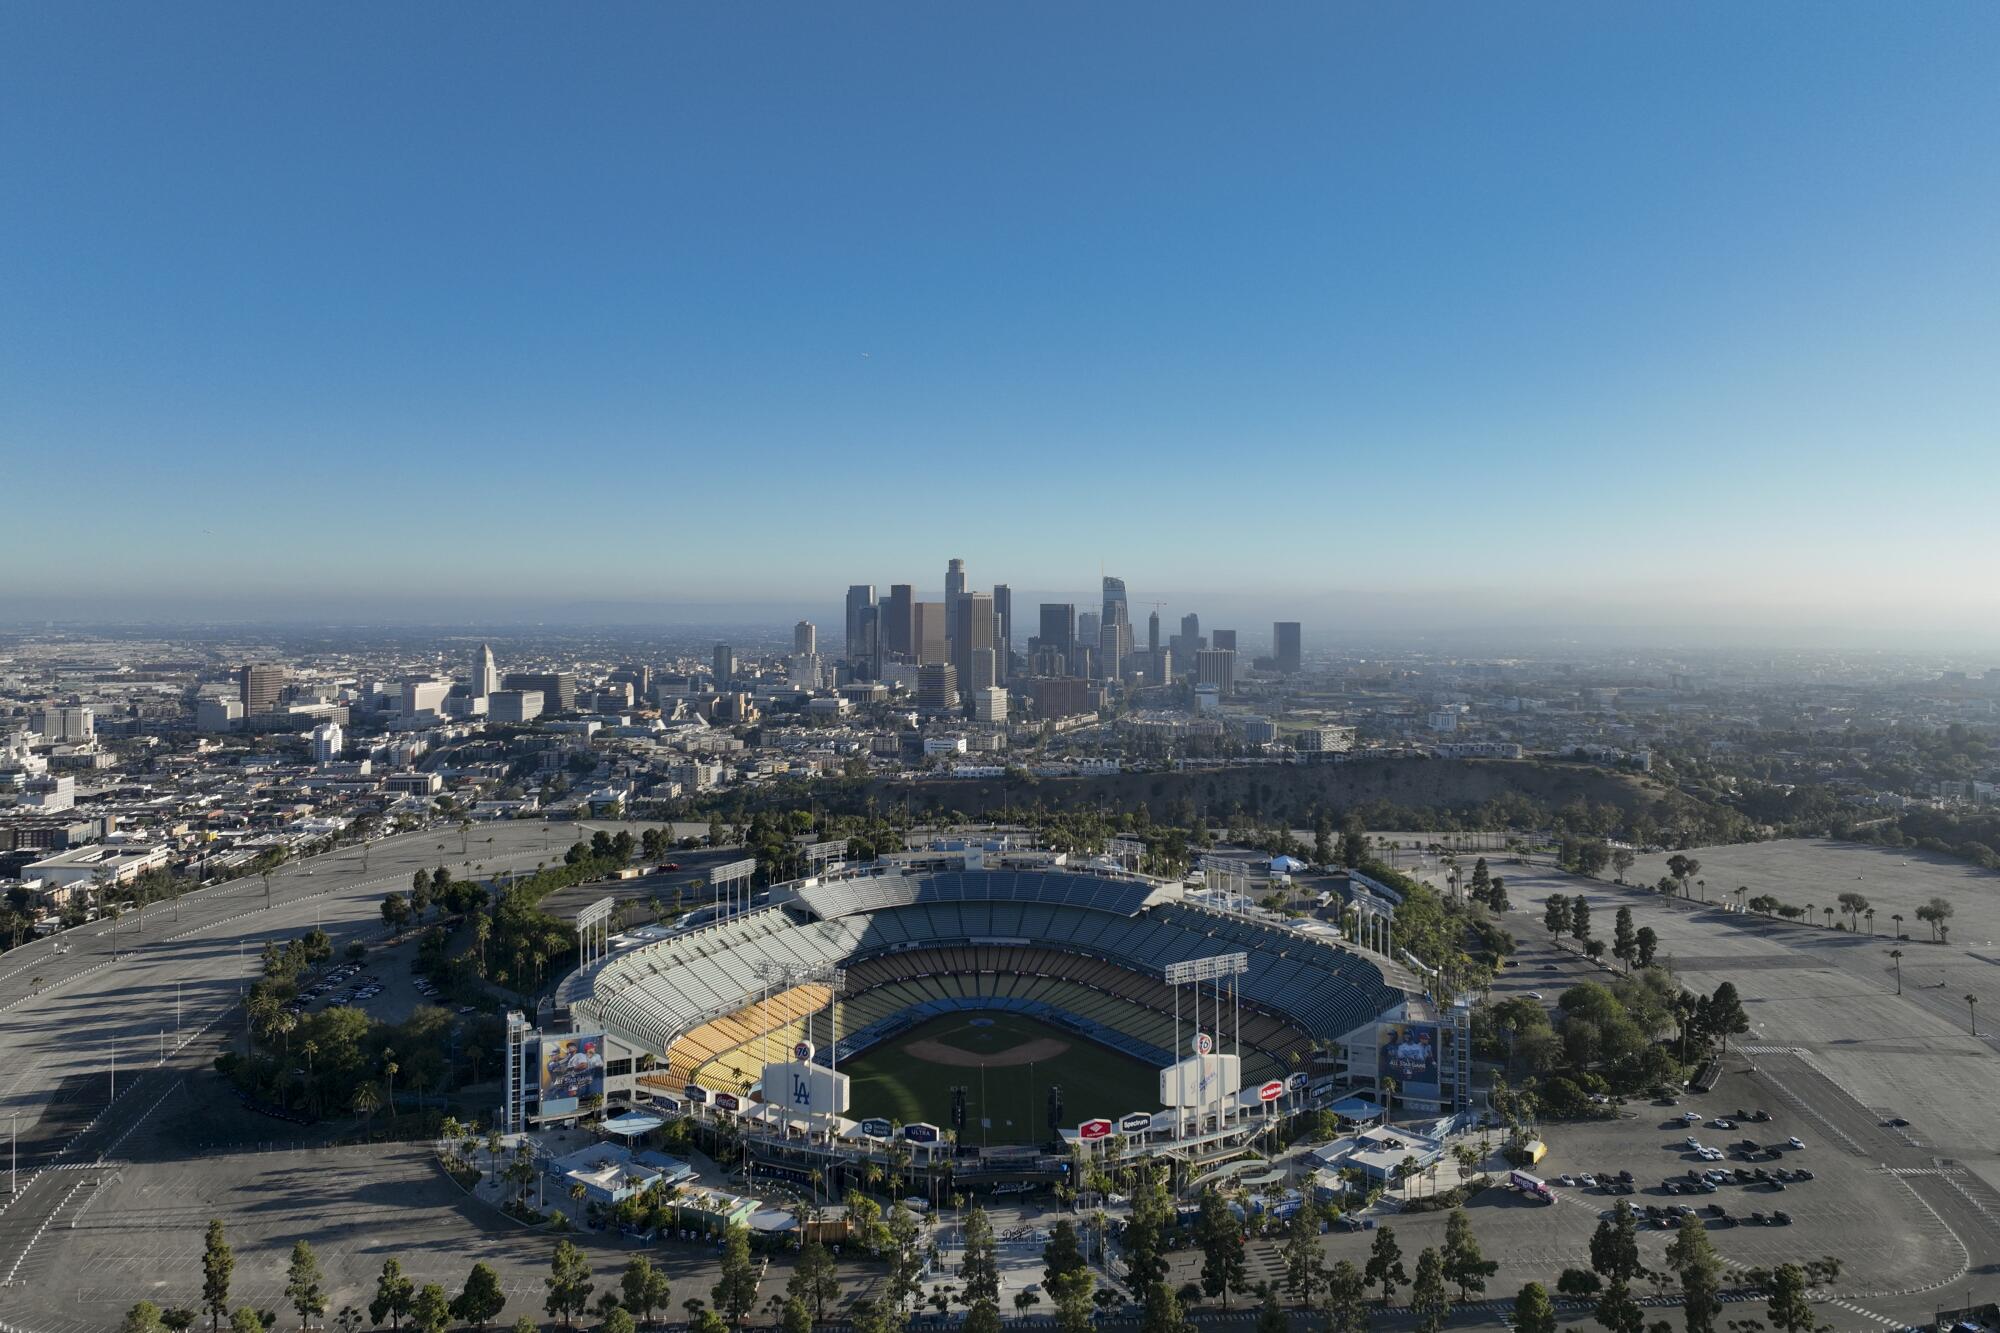 An aerial view of Dodger Stadium with downtown L.A. in the background.